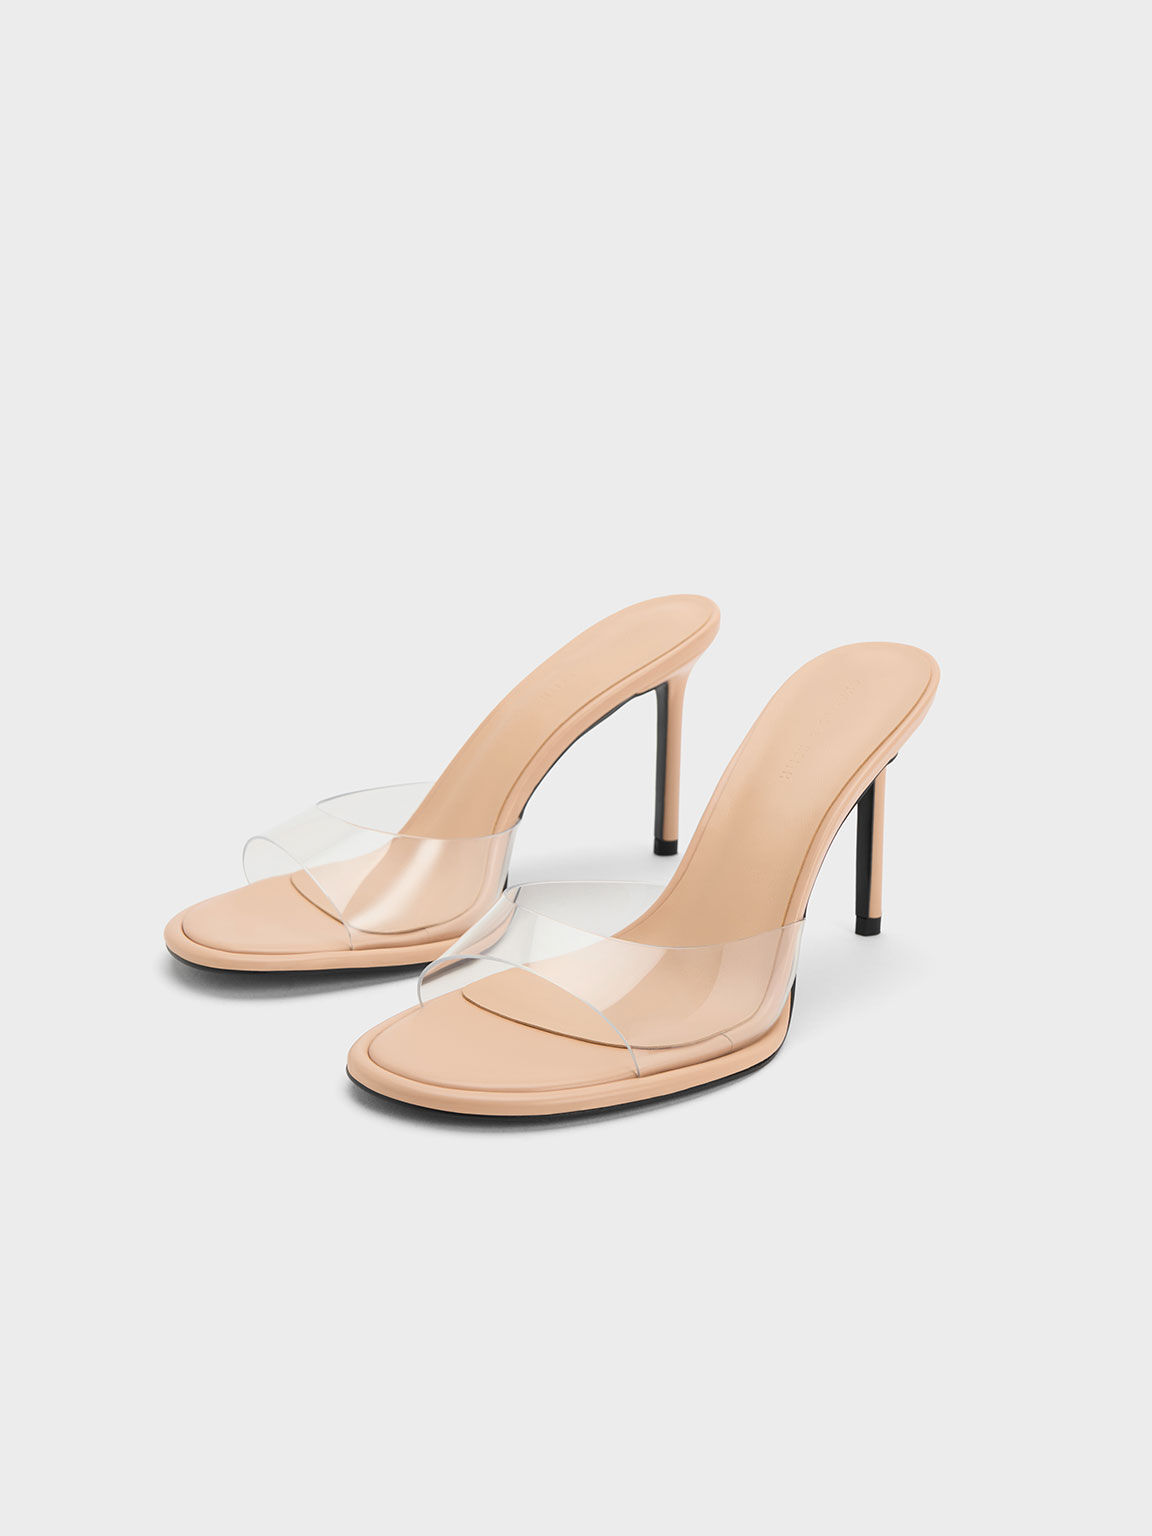 Nude See-Through Cylindrical Heel Mules - CHARLES & KEITH SG